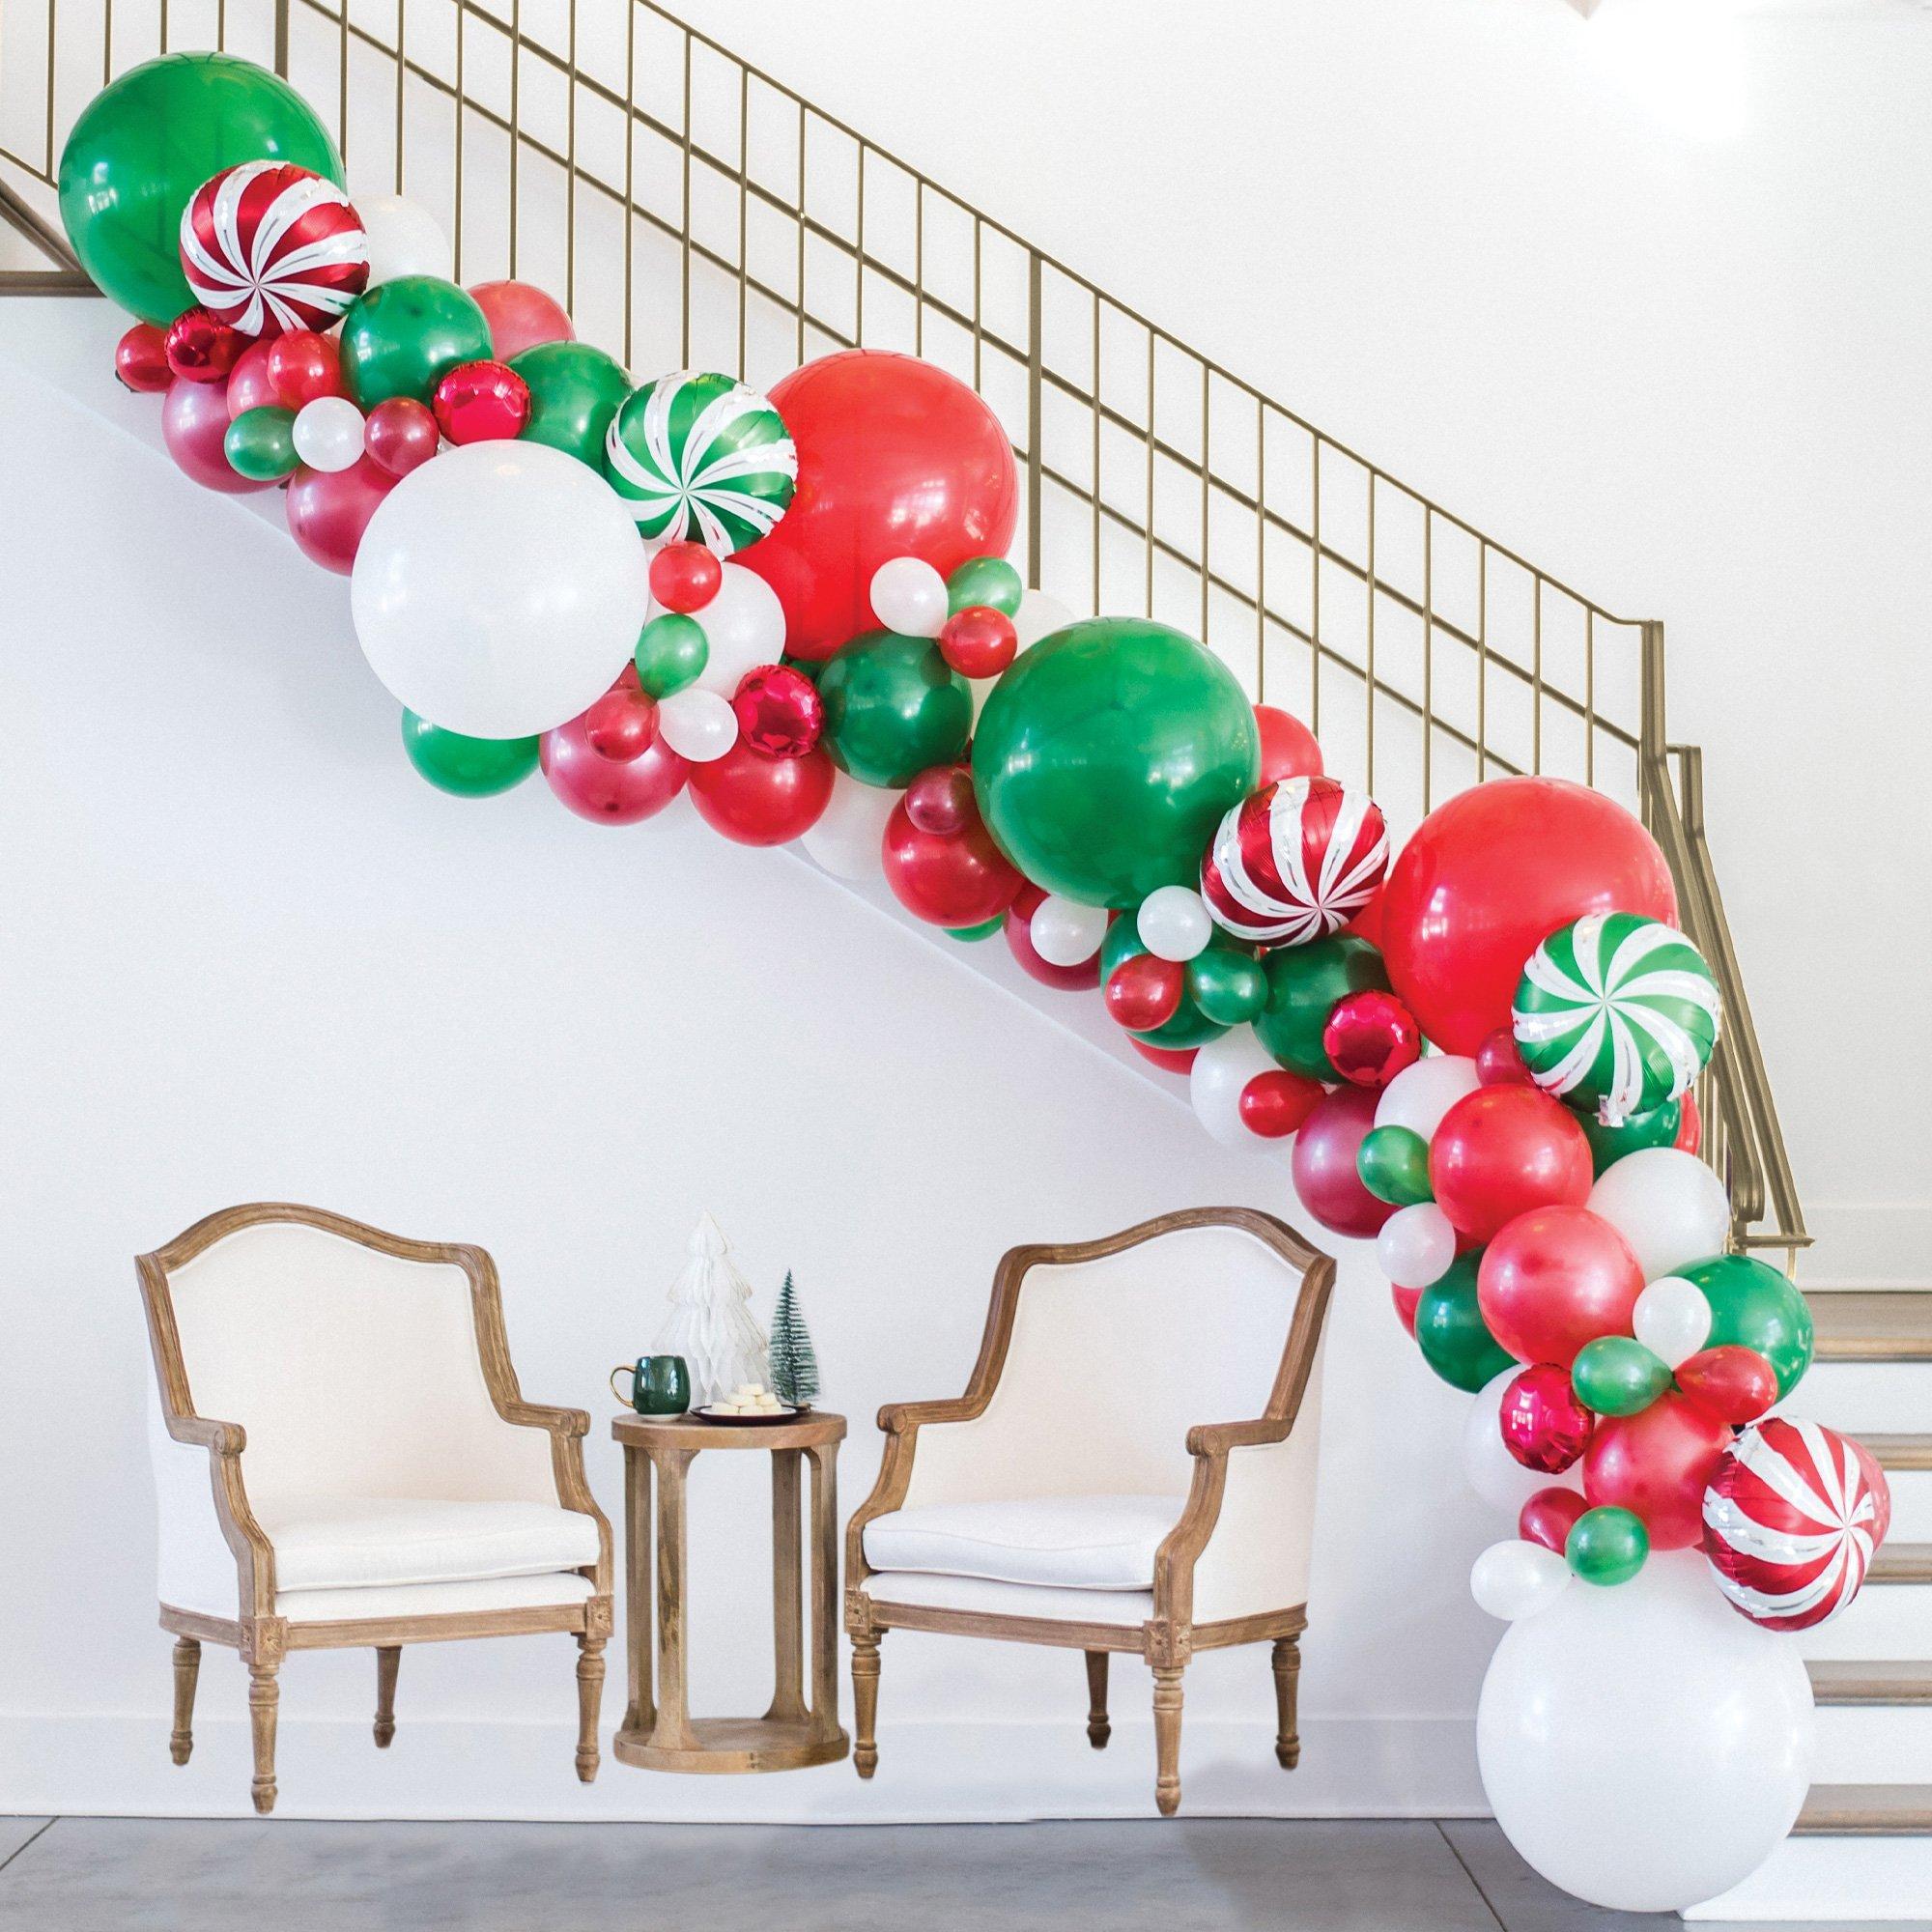 No Helium Required for this Epic Balloon Ceiling - Make:  Balloon ceiling,  Balloon ceiling decorations, Balloon decorations without helium